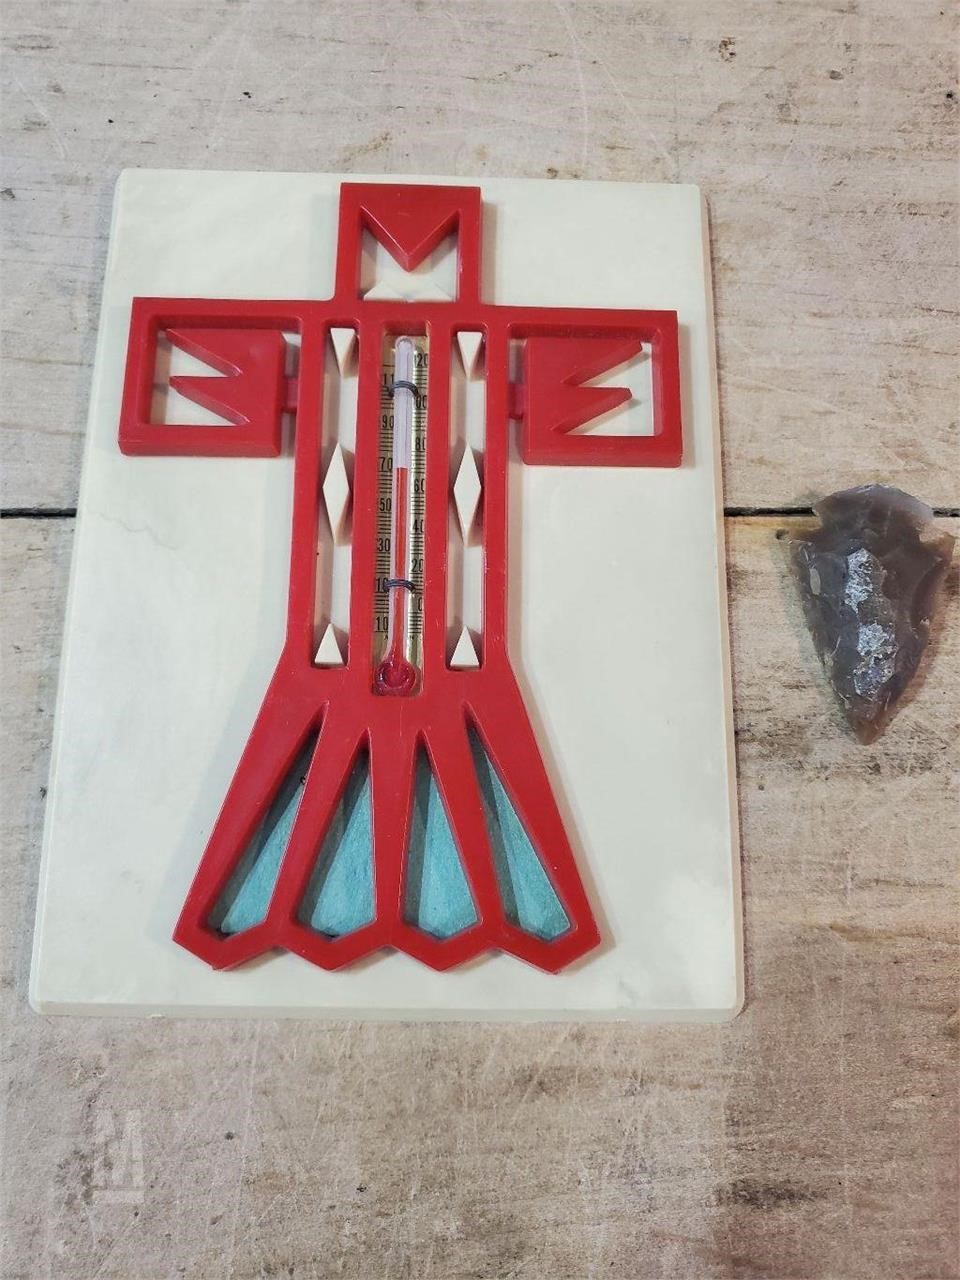 St Labre Indian School Thermometer And Arrowhead Other Items For Sale 1 Listings Marketbook Co Za Page 1 Of 1